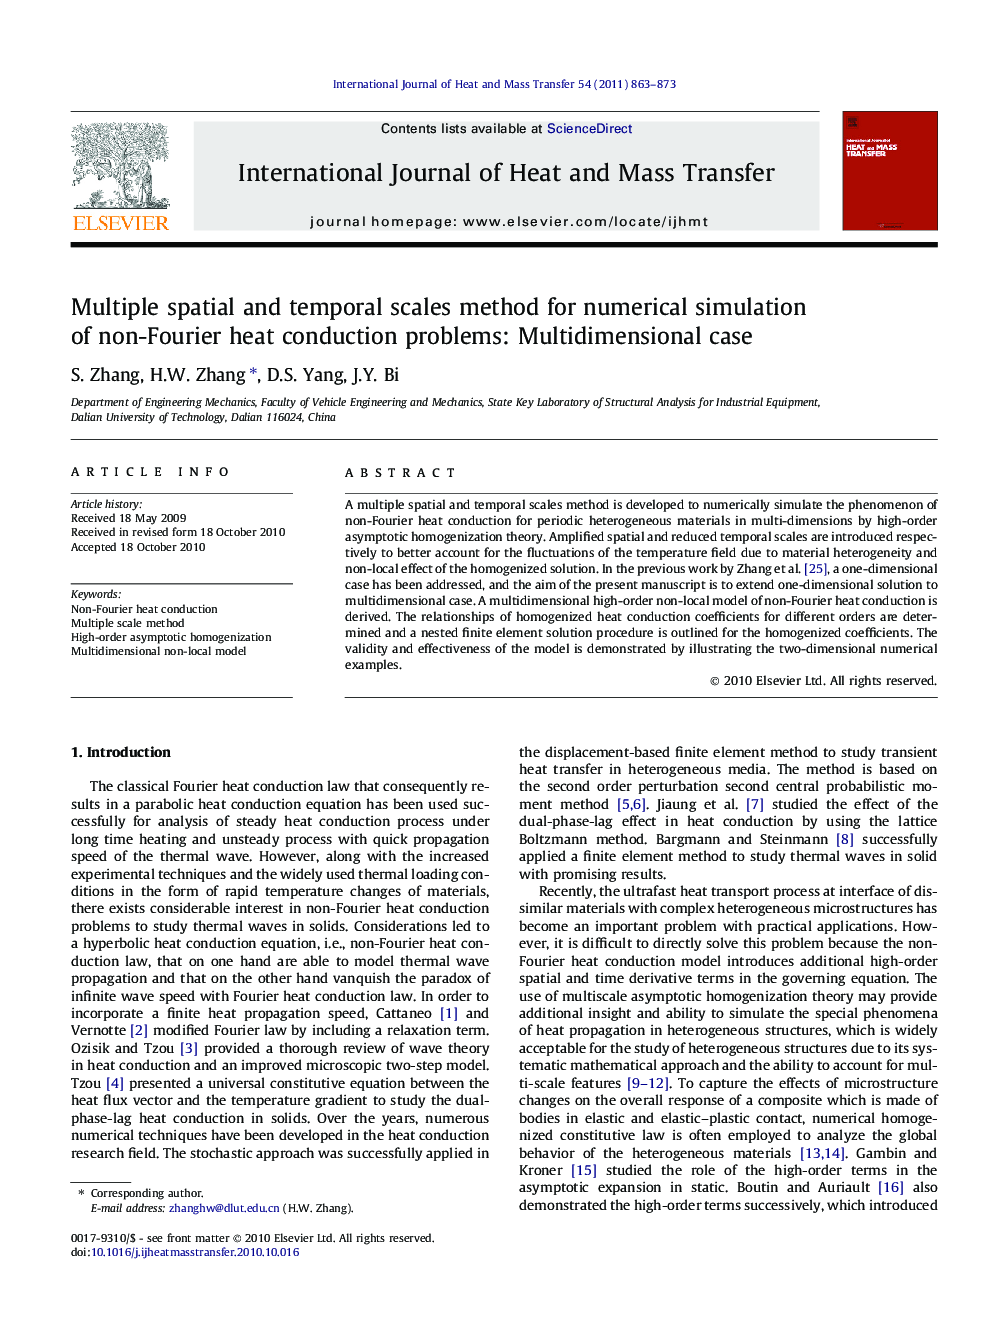 Multiple spatial and temporal scales method for numerical simulation of non-Fourier heat conduction problems: Multidimensional case